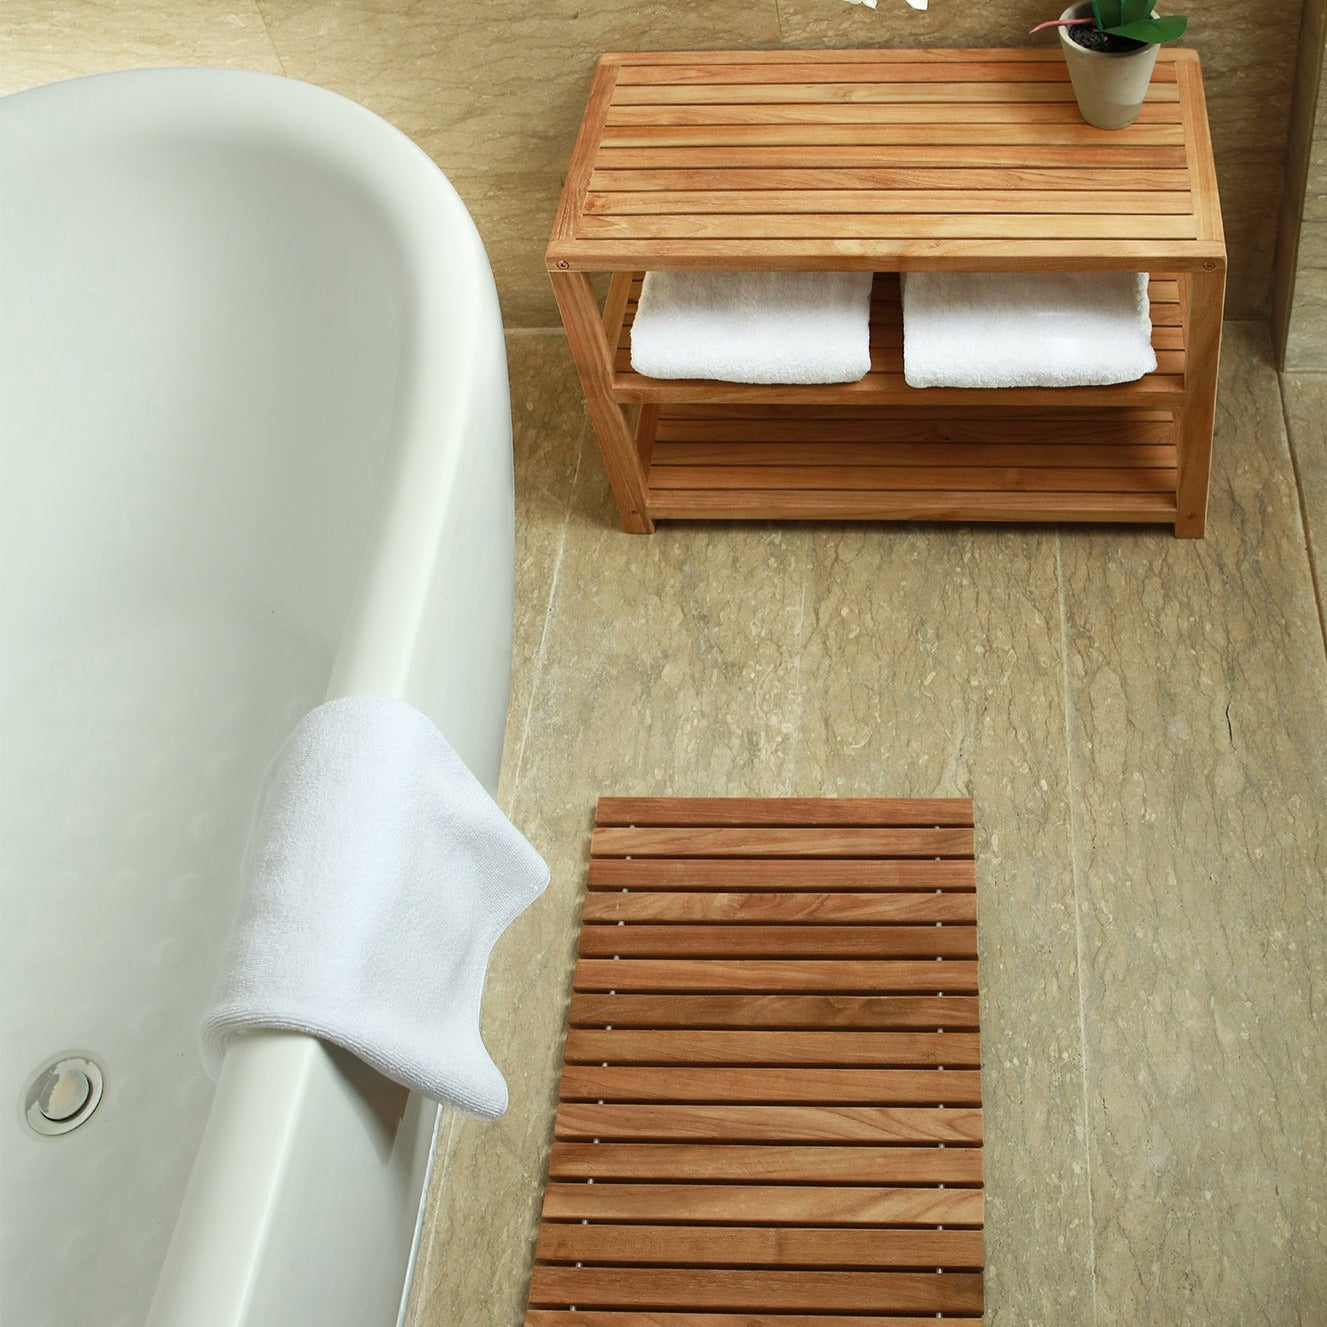 Savannah Natural Teak Shower and Spa/Bathroom/Outdoor - Storage Bench with Shelves- 28" or 40"